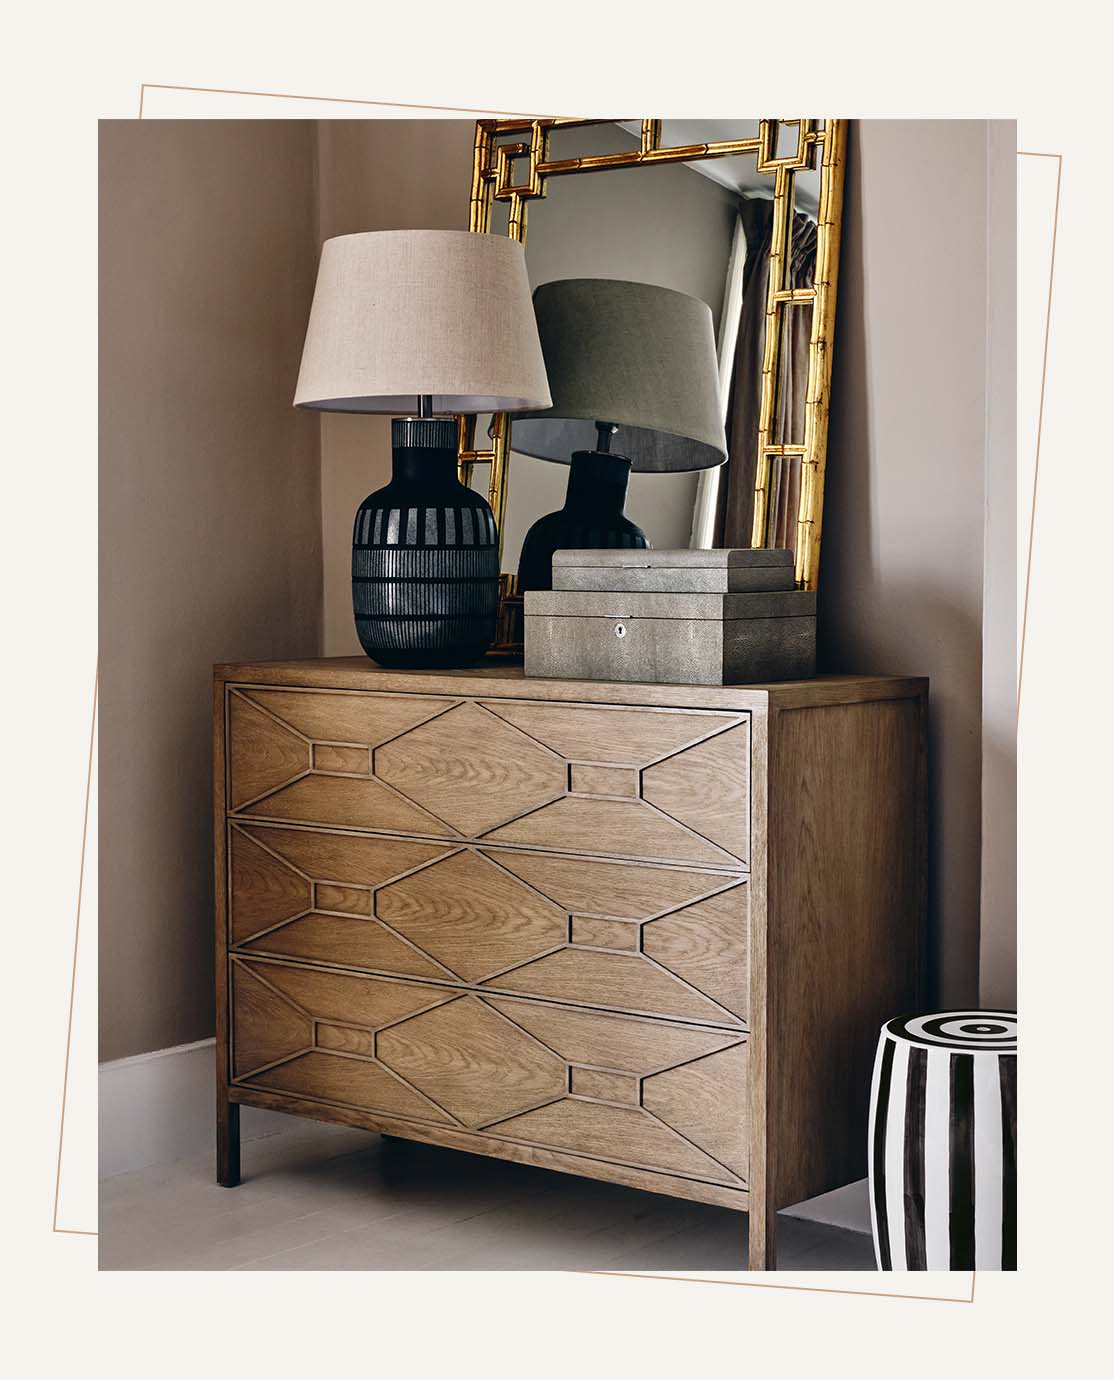 A wooden chest of drawers with diamond panel detailing. A navy blue lamp and gold mirror sit on top of it.